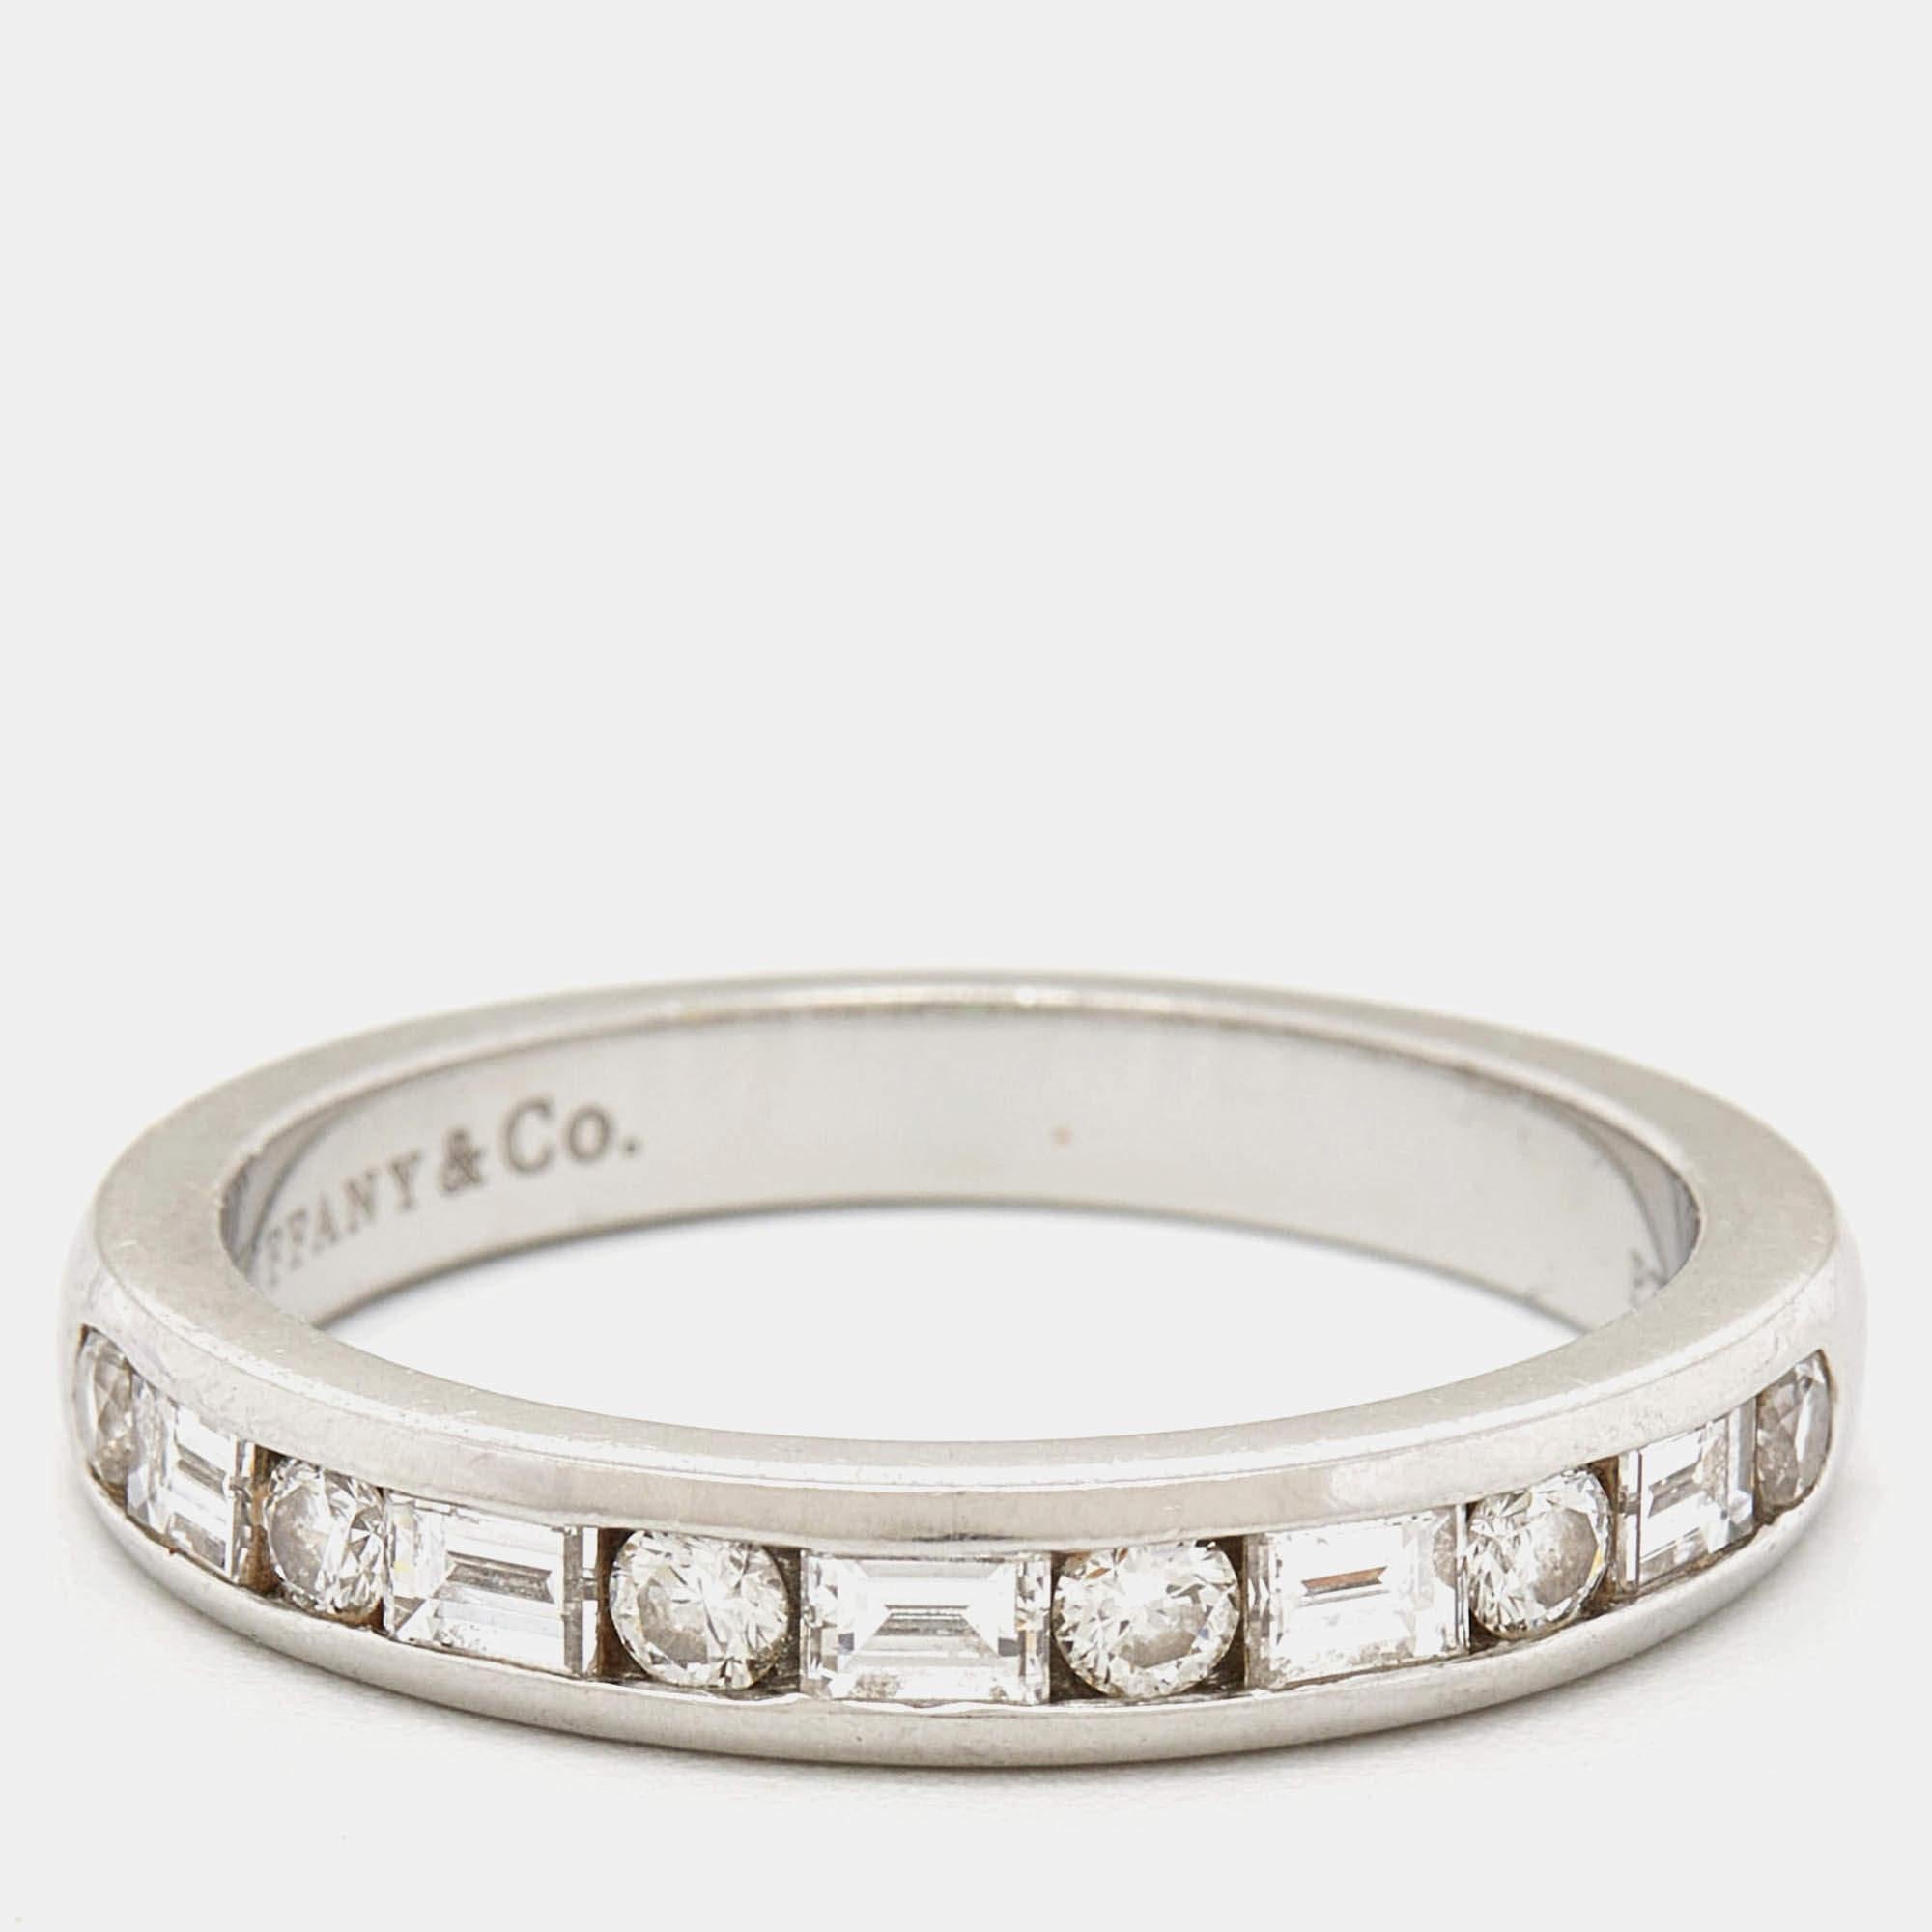 The Tiffany & Co. ring is a stunning piece of jewelry. Crafted in platinum, it features a channel setting with both round and baguette-cut diamonds, creating a timeless and elegant design that sparkles with sophistication.

